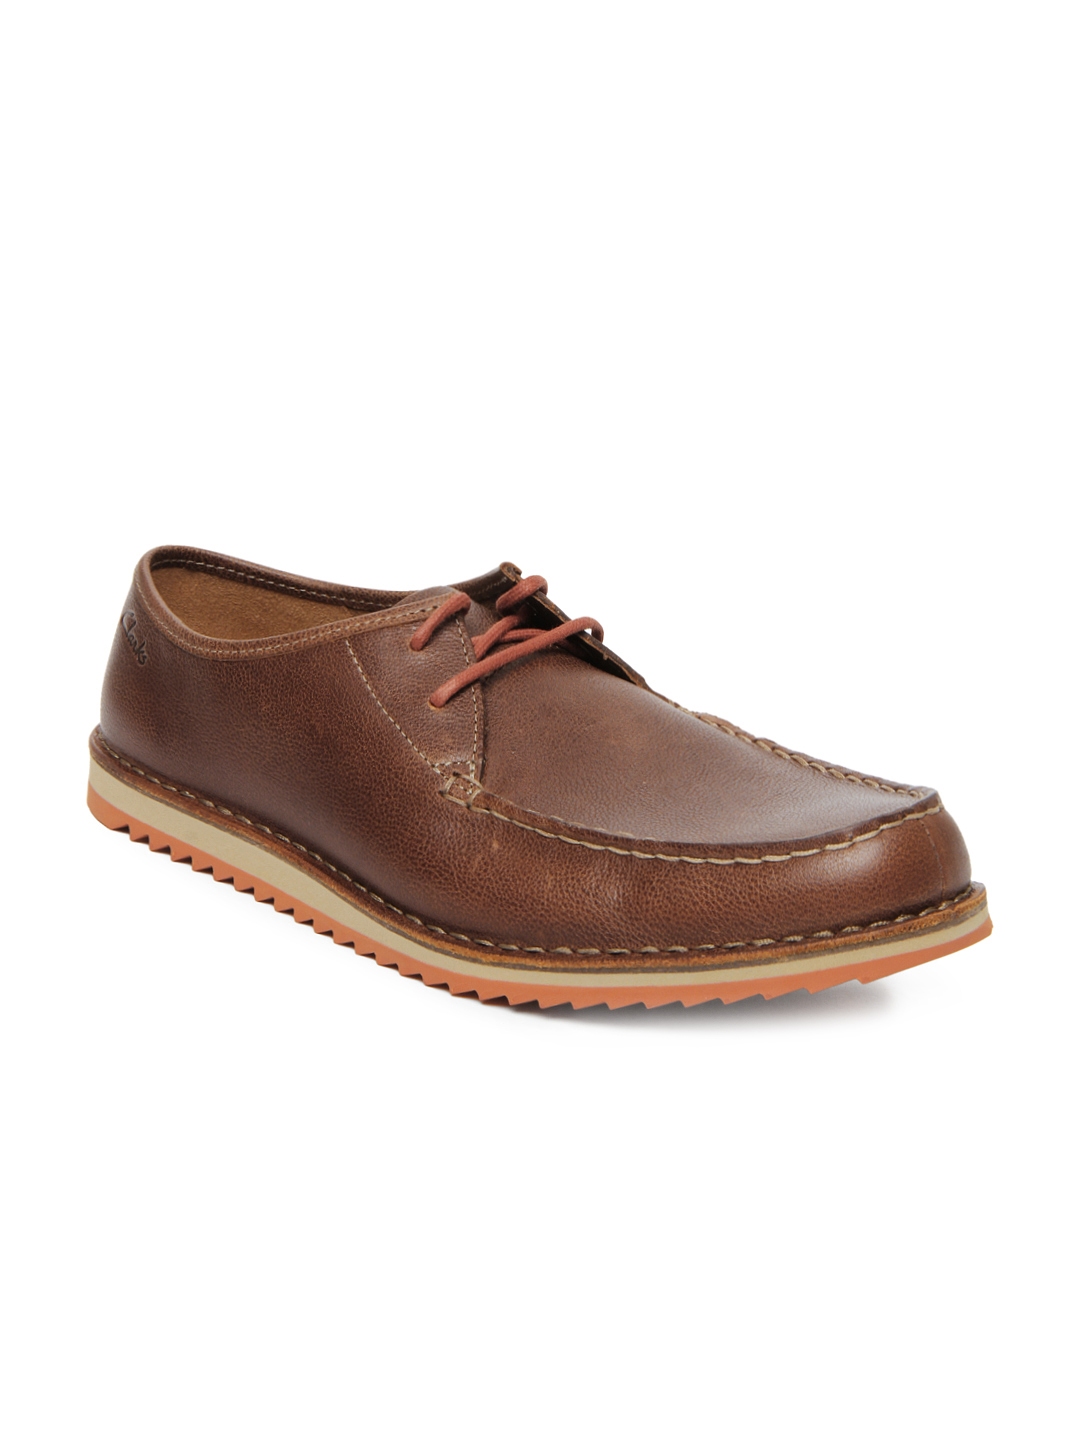 Buy Clarks Men Brown Maxim Edge Casual Shoes - Casual Shoes for Men ...